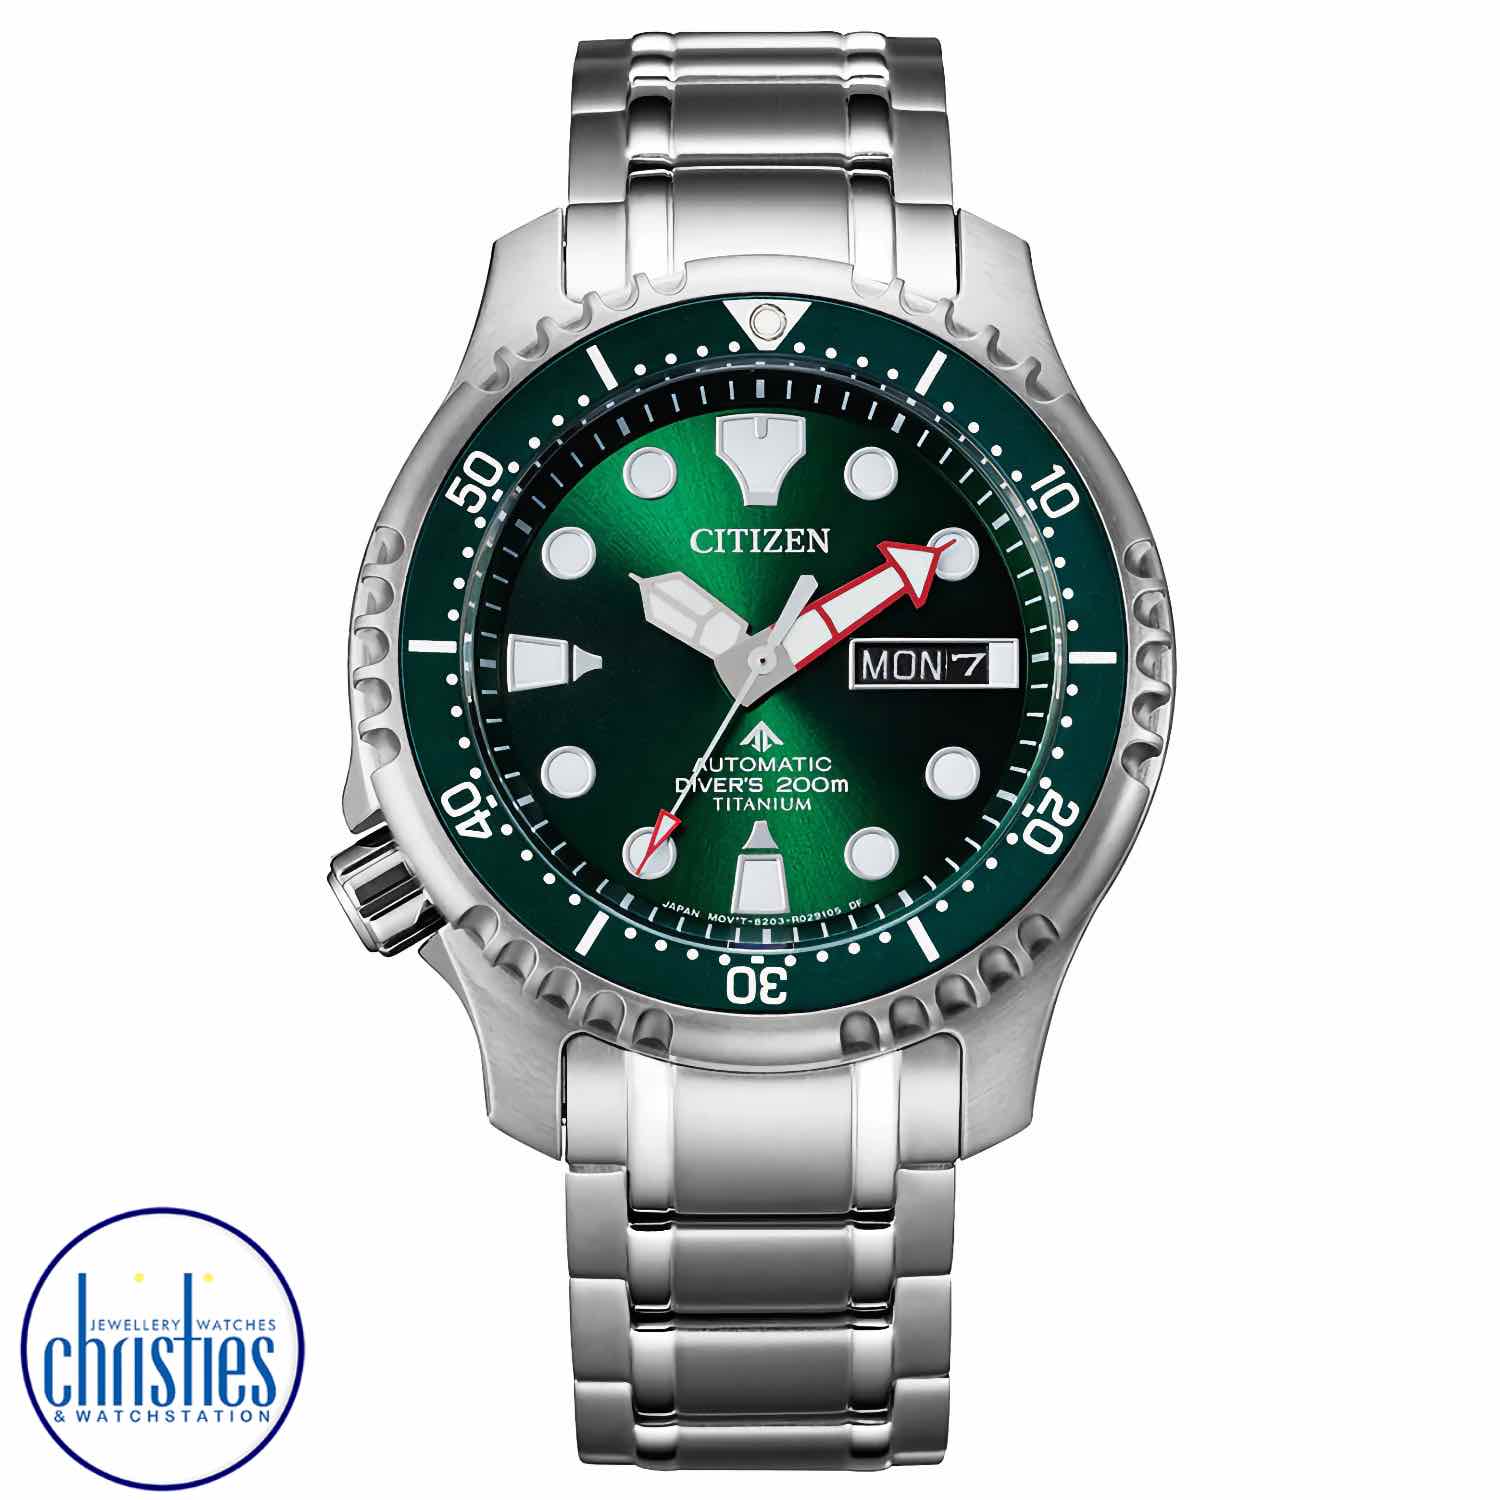 NY0100-50X CITIZEN Automatic Titanium Divers Watch. An enticing fusion of precision, durability and stylish design elements, this watch reflects meticulously considered craftsmanship in the pursuit of enduring quality.